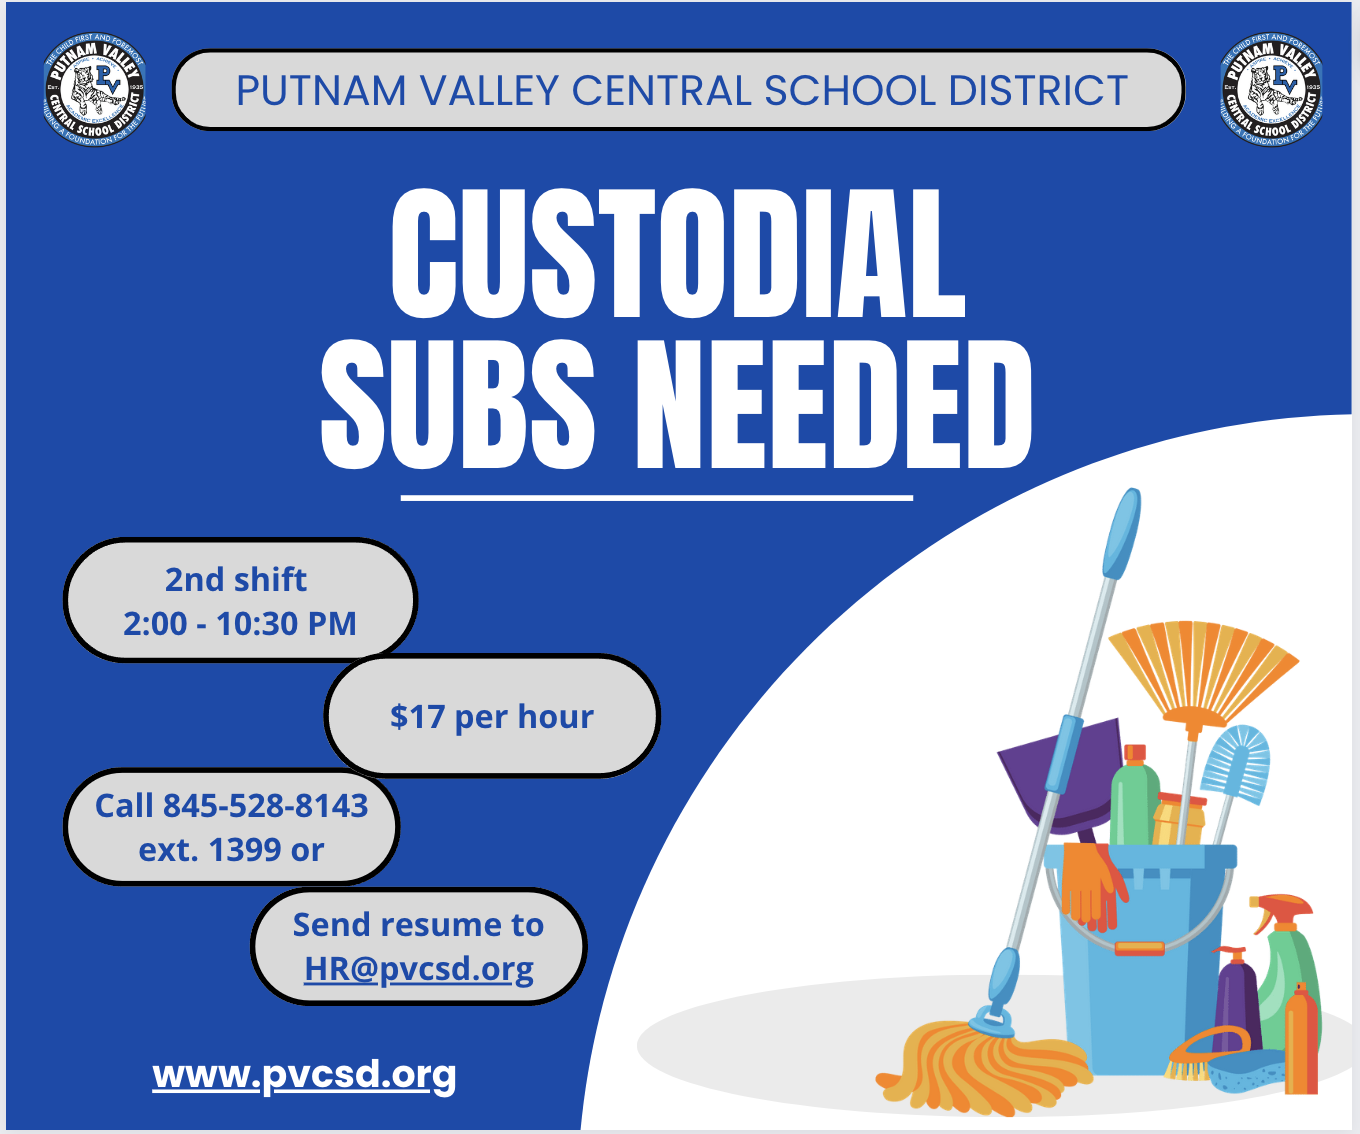 CUSTODIAL SUBS NEEDED
2nd shift
2:00 - 10:30 PM
$17 per hour
Call 845-528-8143
ext. 1399 or
Send resume to HR@pvcsd.org